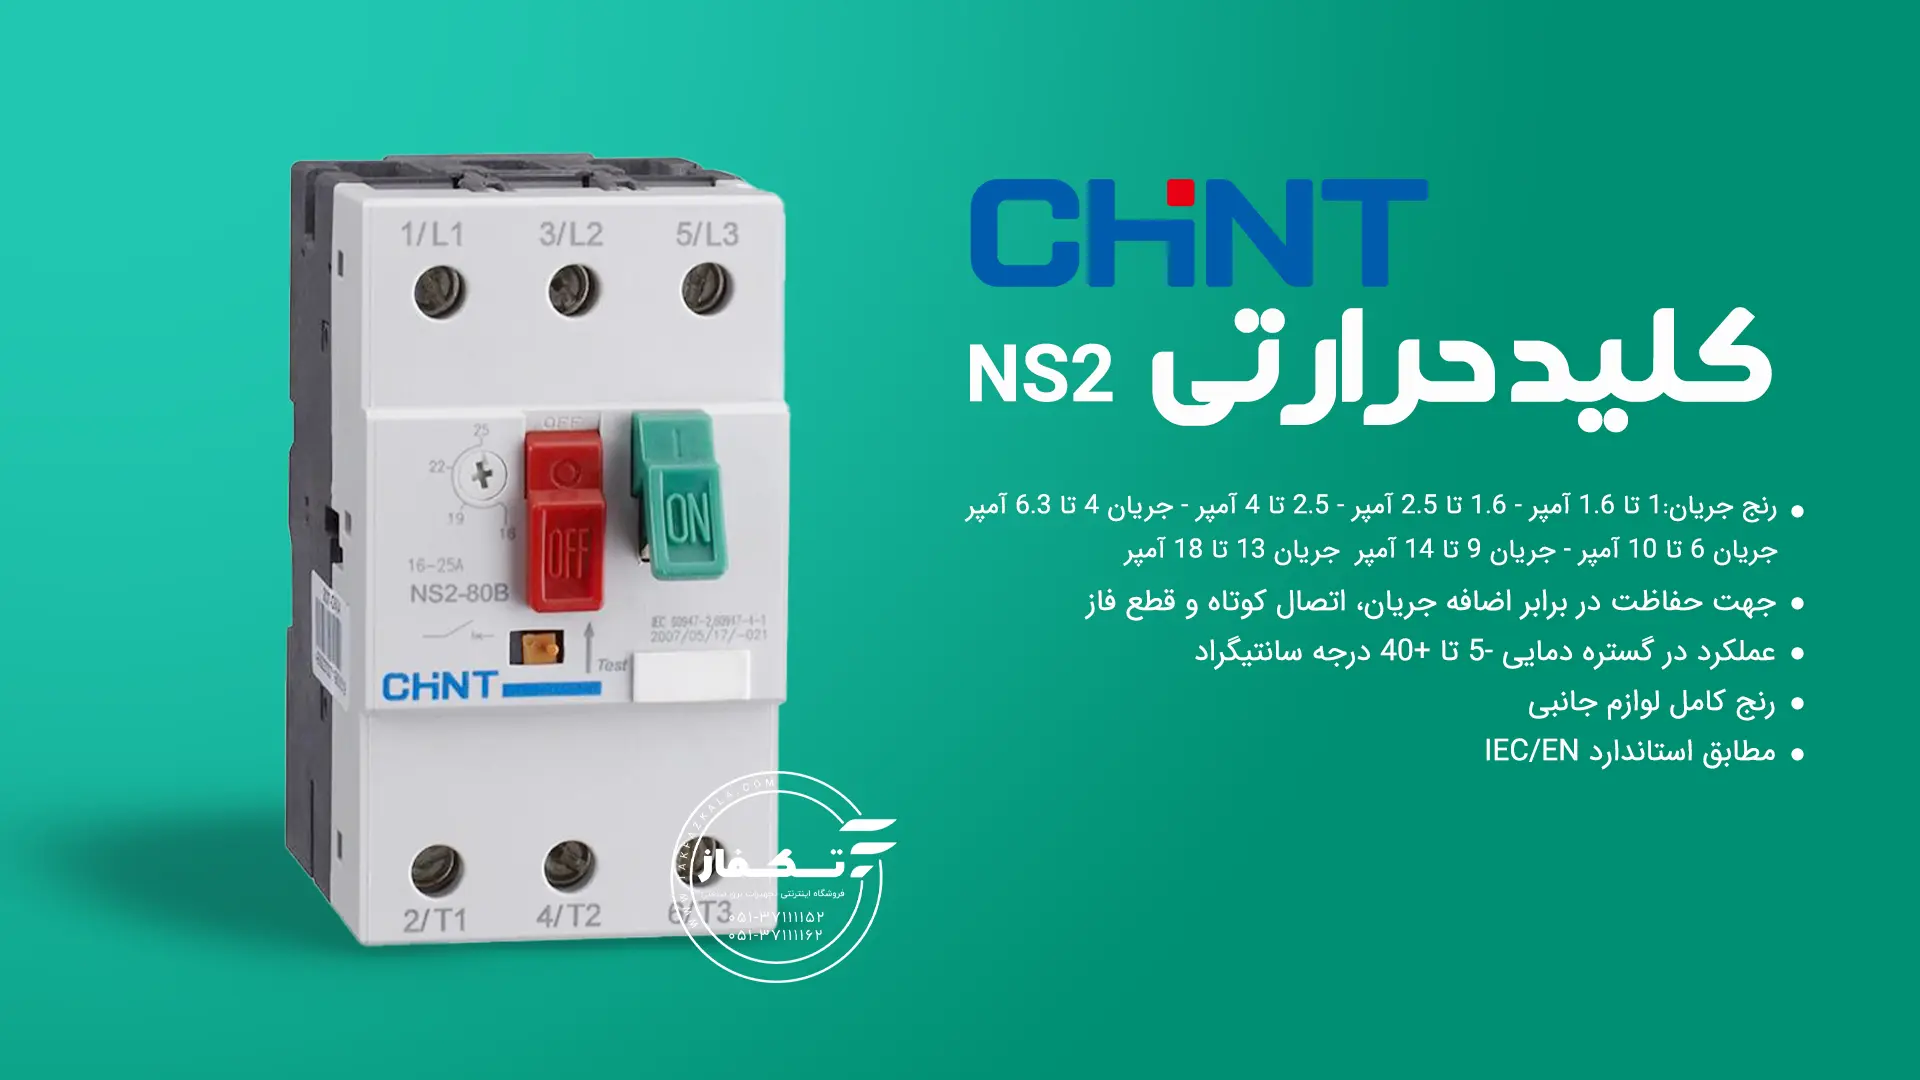 Thermal switch NS2 current 4 to 6.3 amps